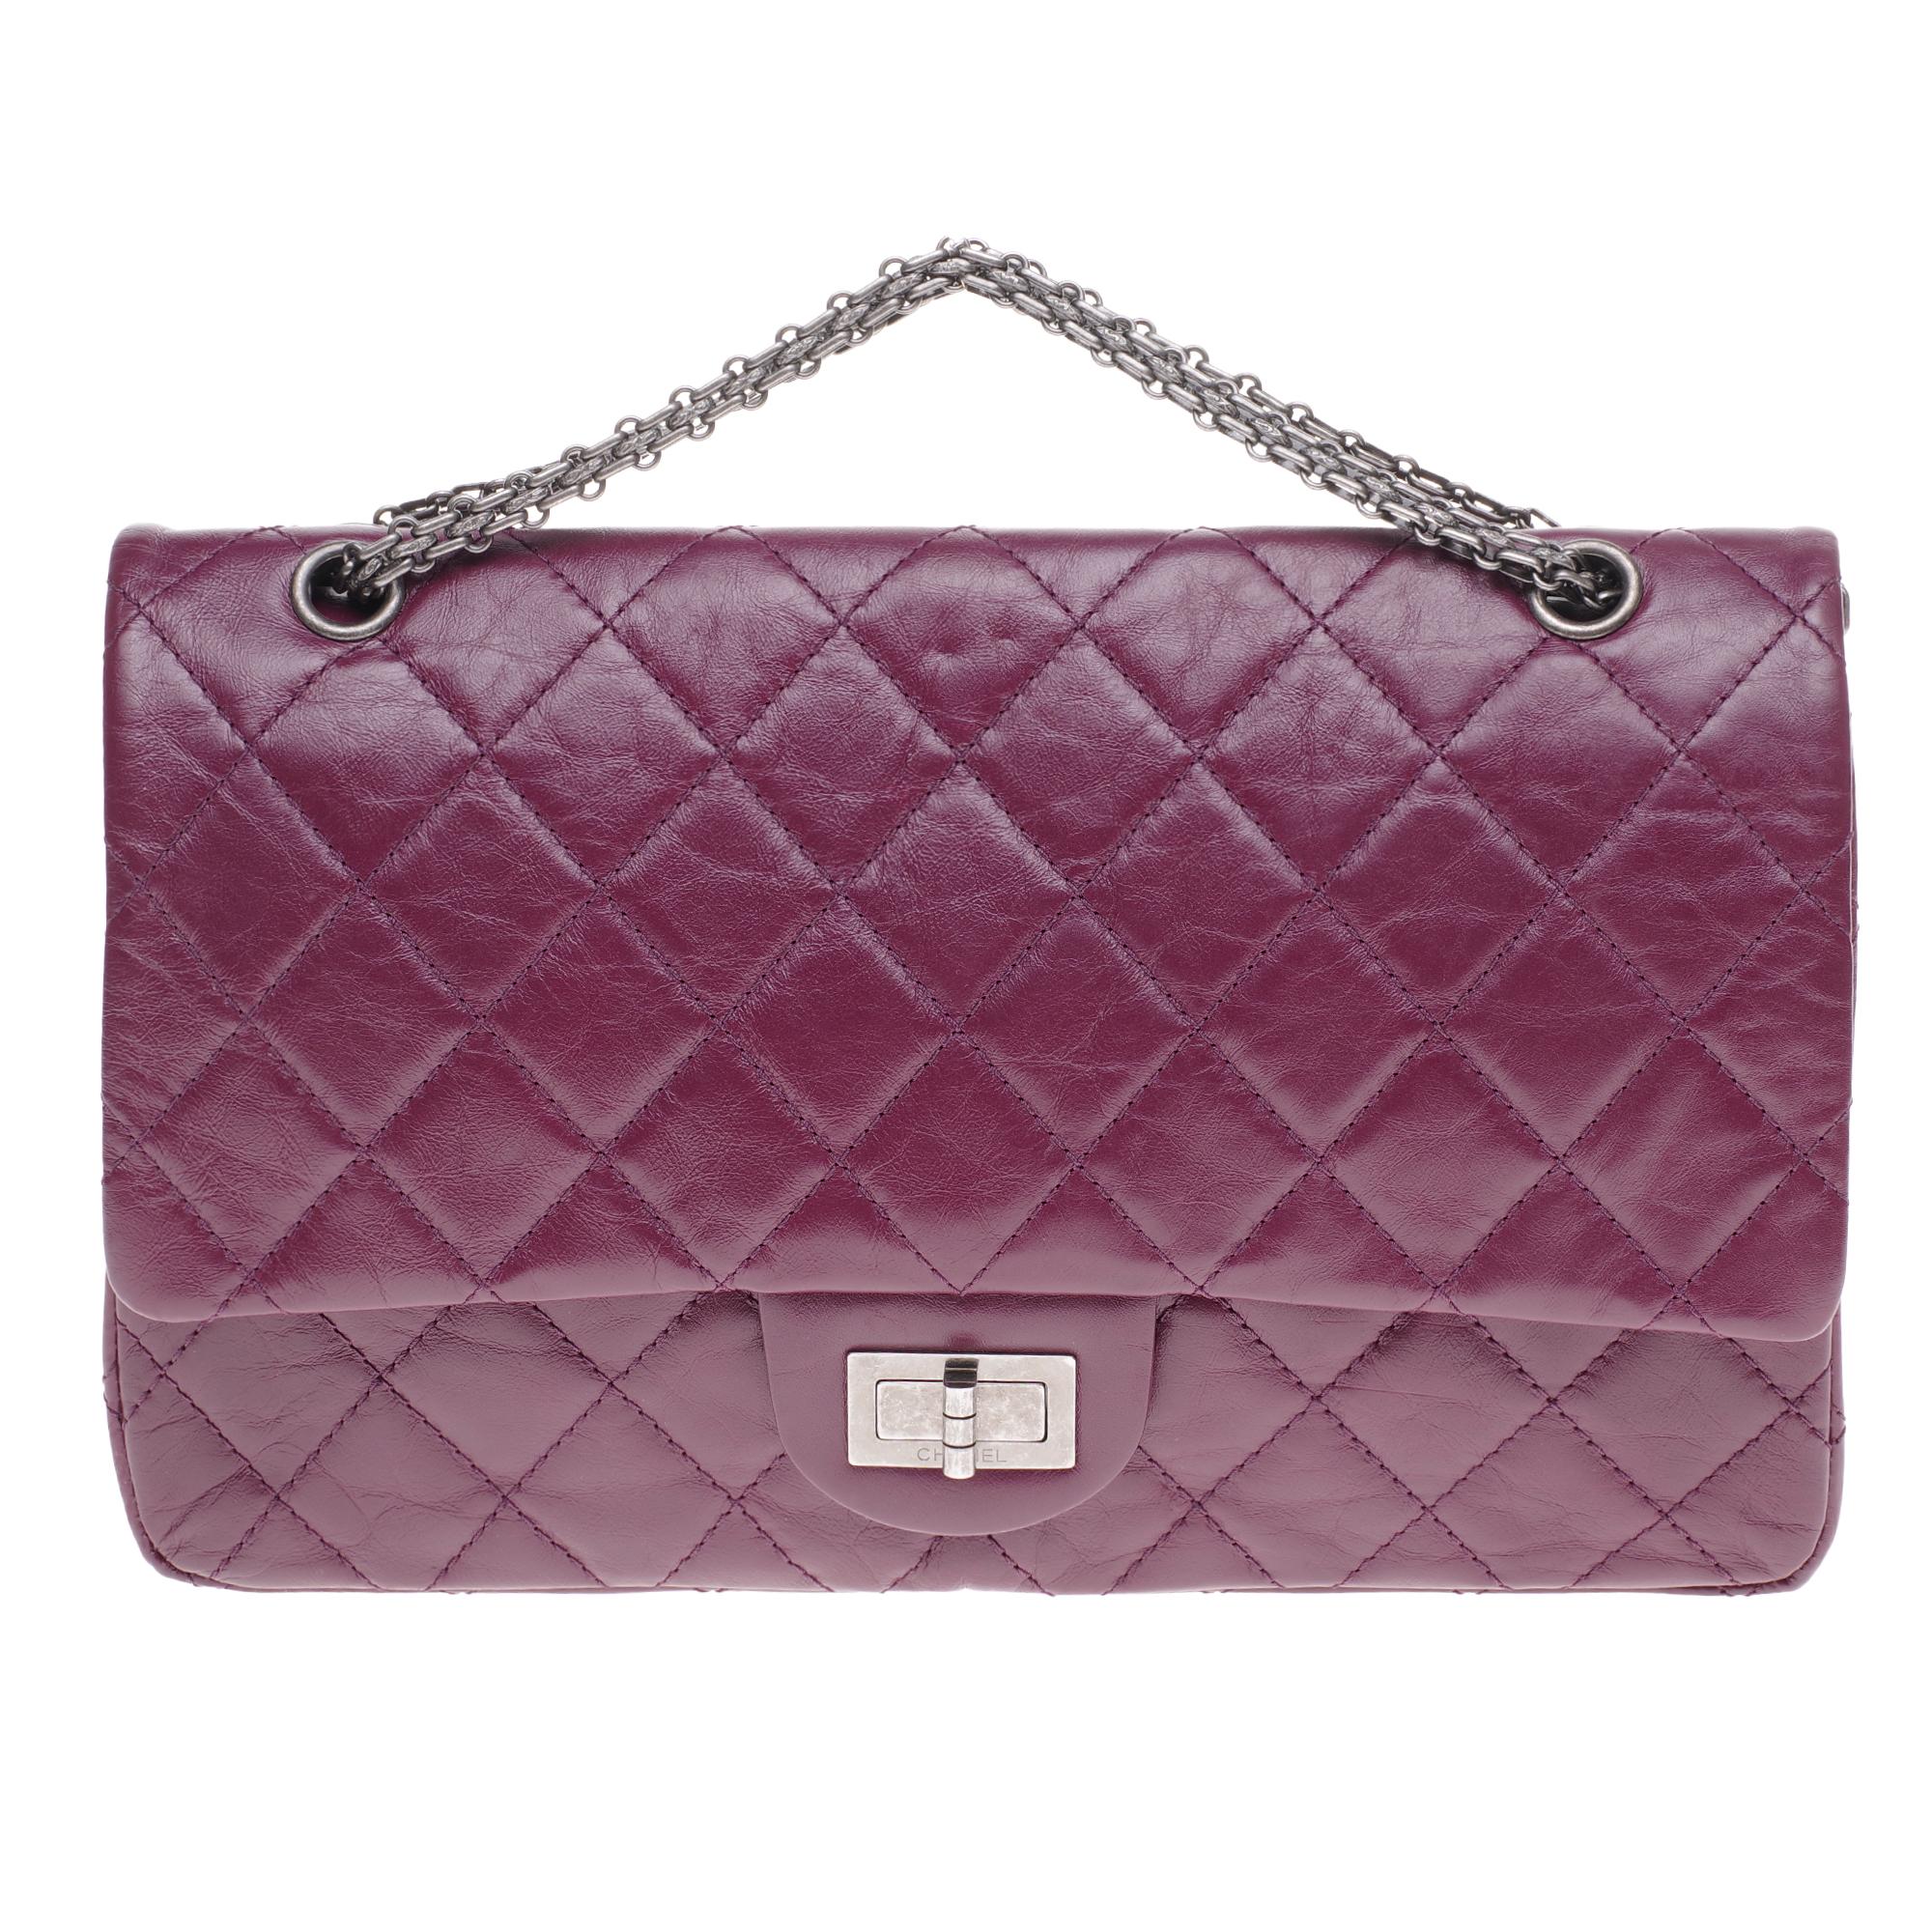 Majestic and just as Splendid Chanel 2.55 handbag in quilted leather color Plum aged effect, matte silver metal trim, a chain handle transformable in matte silver metal allowing a shoulder or crossbody wear.

Mademoiselle closure in matte silver